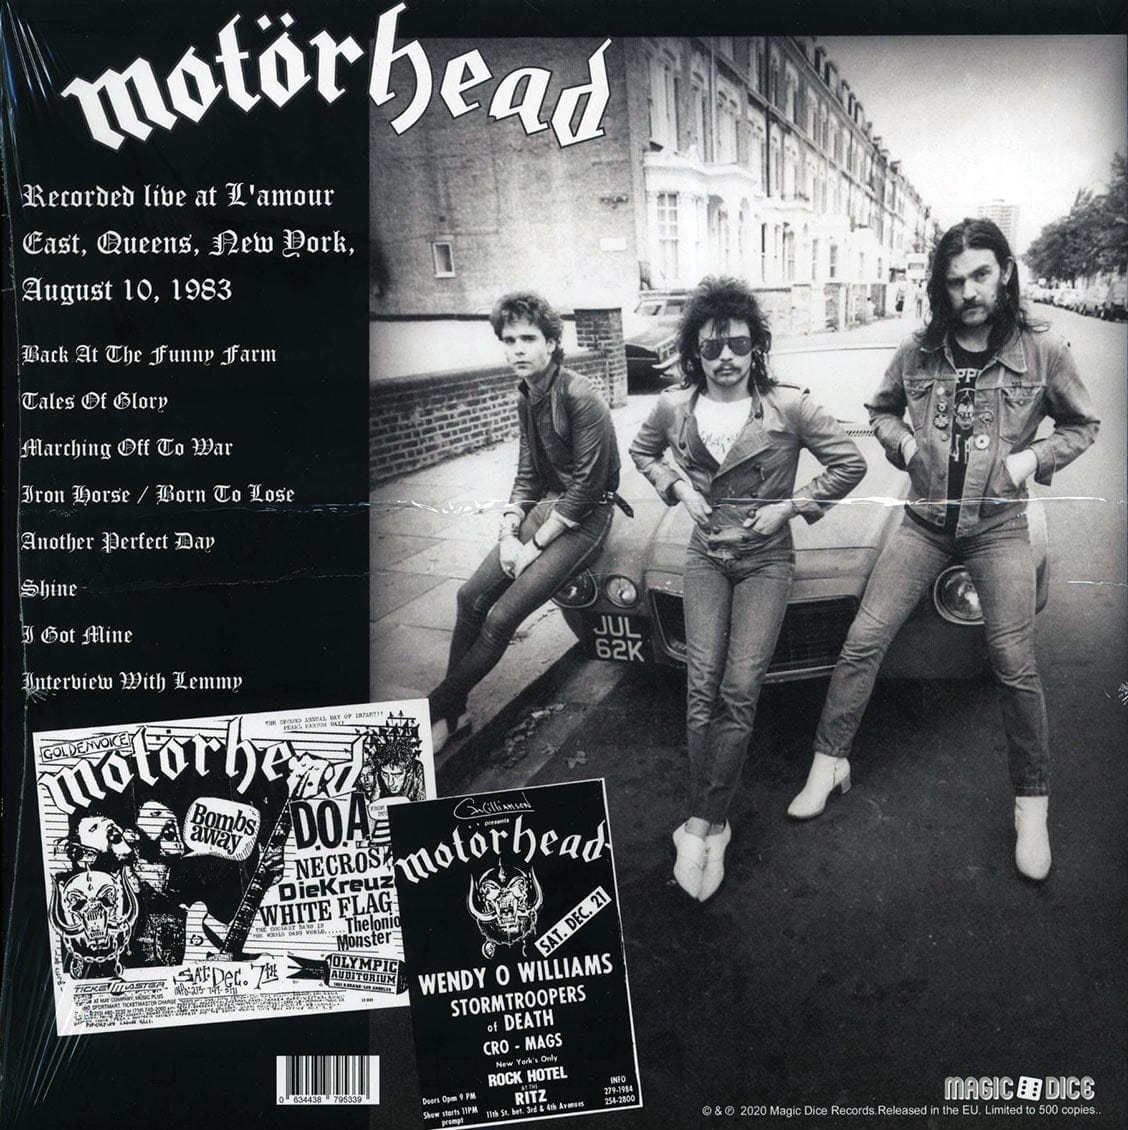 MOTORHEAD: Tales of Glory • Live at L'amour East, Queens, New York, August 10th, 1983 • FM Broadcast LP (limited to 500 copies)